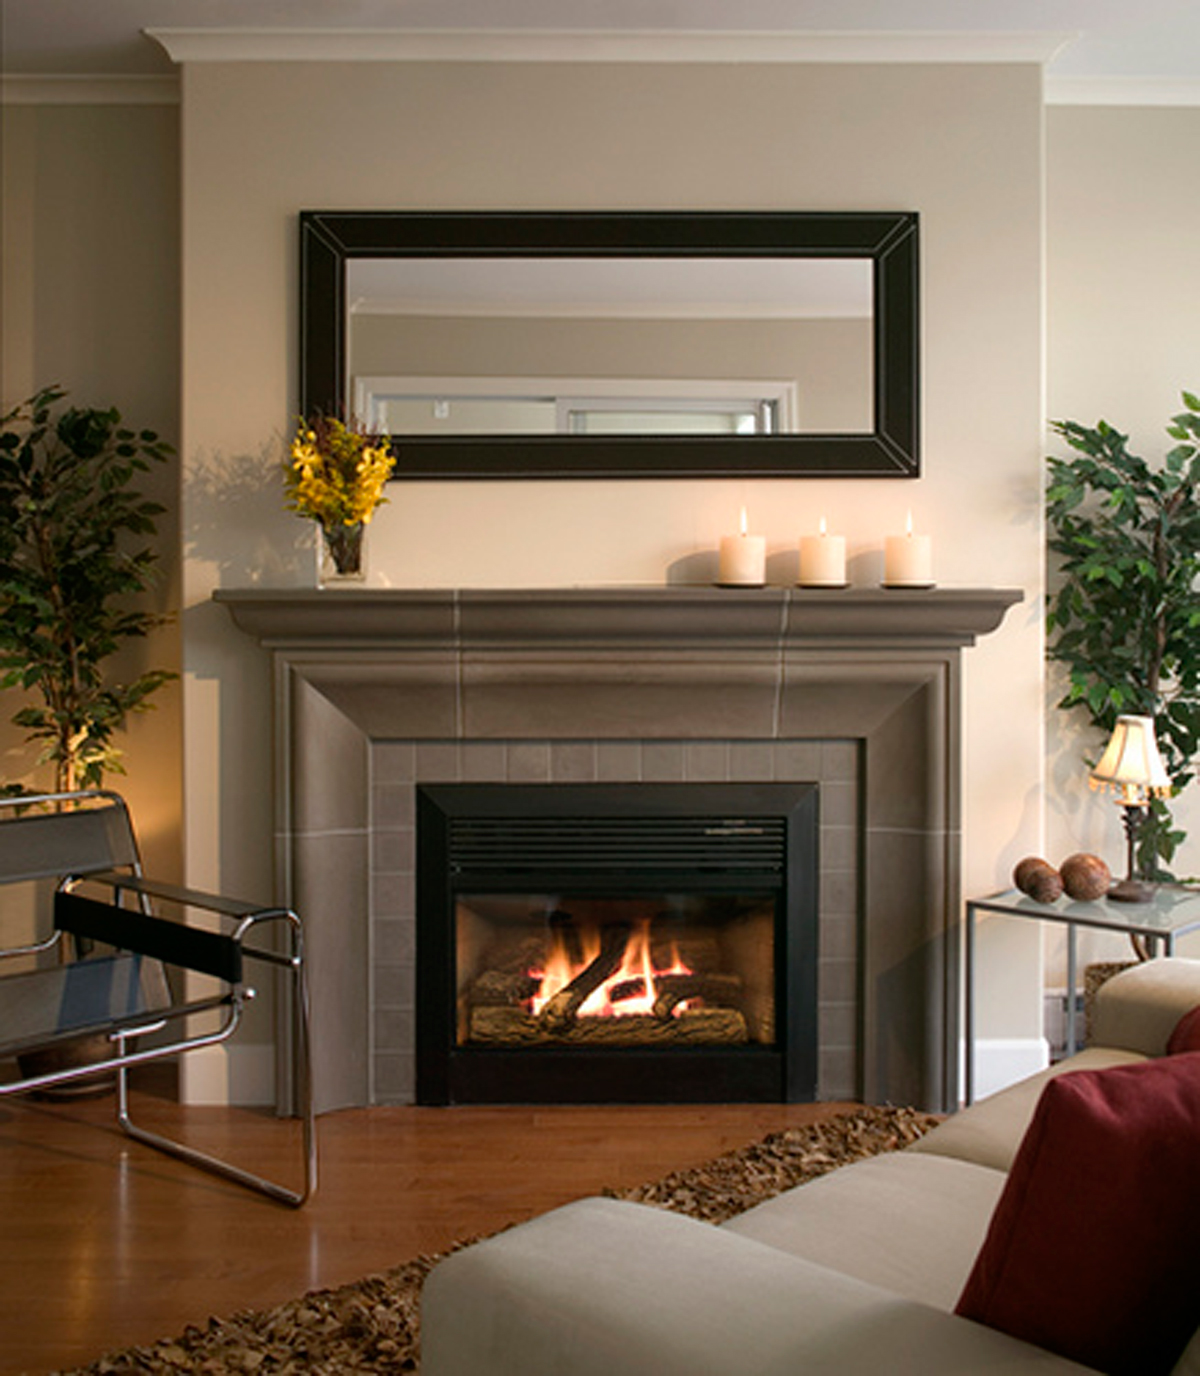 Cool Fireplace Cover Designs To Protect And Enhance Your Home